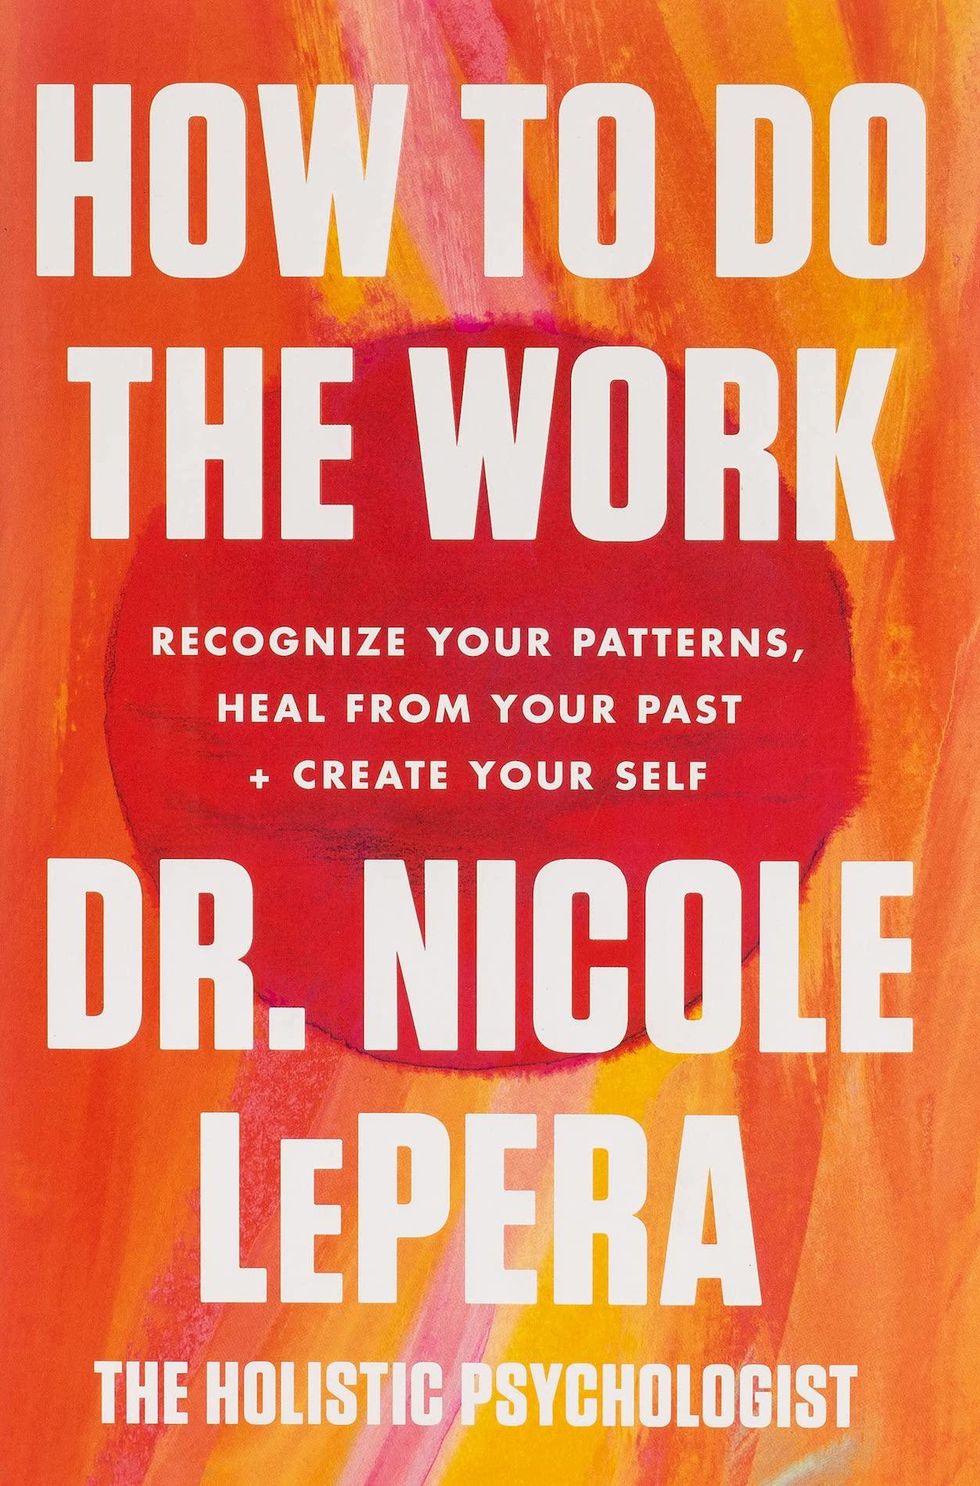 How To Do The Work: Recognize Your Patterns, Heal From Your Past, and Create Your Self by Dr. Nicole Le Pera